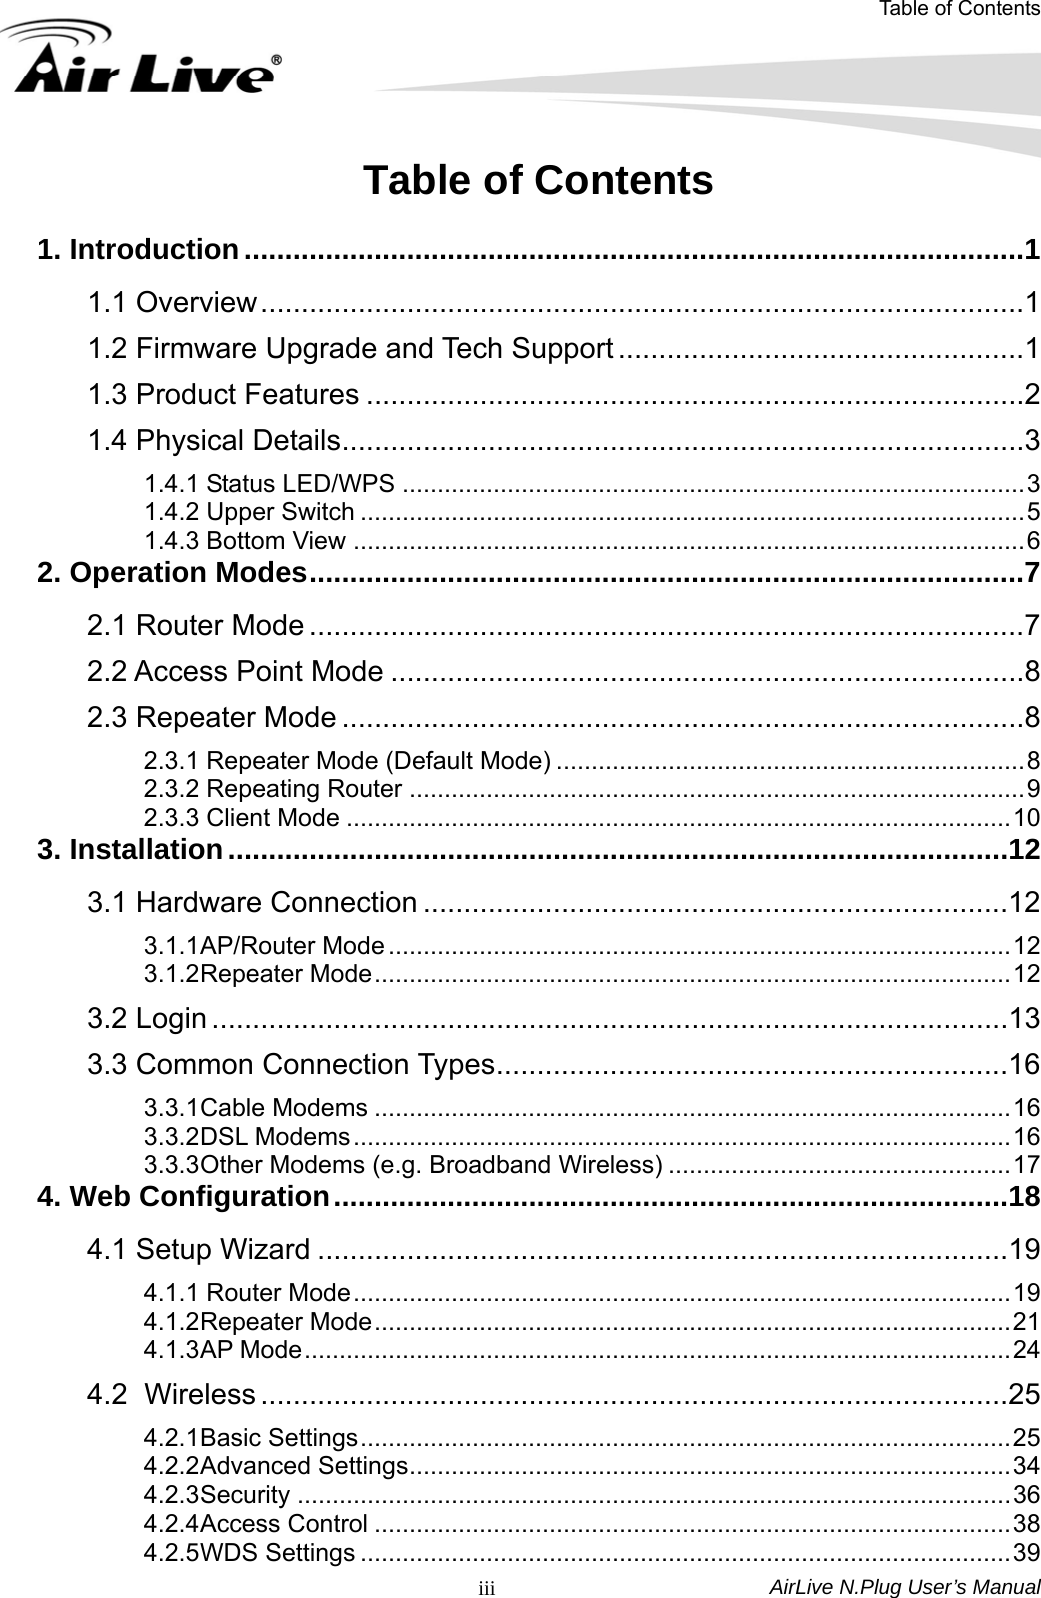 Table of Contents AirLive N.Plug User’s Manual  iiiTable of Contents  1. Introduction................................................................................................1 1.1 Overview..............................................................................................1 1.2 Firmware Upgrade and Tech Support ..................................................1 1.3 Product Features .................................................................................2 1.4 Physical Details....................................................................................3 1.4.1 Status LED/WPS .........................................................................................3 1.4.2 Upper Switch ...............................................................................................5 1.4.3 Bottom View ................................................................................................6 2. Operation Modes........................................................................................7 2.1 Router Mode ........................................................................................7 2.2 Access Point Mode ..............................................................................8 2.3 Repeater Mode ....................................................................................8 2.3.1 Repeater Mode (Default Mode) ...................................................................8 2.3.2 Repeating Router ........................................................................................9 2.3.3 Client Mode ...............................................................................................10 3. Installation................................................................................................12 3.1 Hardware Connection ........................................................................12 3.1.1 AP/Router Mode .........................................................................................12 3.1.2 Repeater Mode...........................................................................................12 3.2 Login ..................................................................................................13 3.3 Common Connection Types...............................................................16 3.3.1 Cable Modems ...........................................................................................16 3.3.2 DSL Modems..............................................................................................16 3.3.3 Other Modems (e.g. Broadband Wireless) .................................................17 4. Web Configuration...................................................................................18 4.1 Setup Wizard .....................................................................................19 4.1.1 Router Mode..............................................................................................19 4.1.2 Repeater Mode...........................................................................................21 4.1.3 AP Mode.....................................................................................................24 4.2 Wireless ............................................................................................25 4.2.1 Basic Settings.............................................................................................25 4.2.2 Advanced Settings......................................................................................34 4.2.3 Security ......................................................................................................36 4.2.4 Access Control ...........................................................................................38 4.2.5 WDS Settings .............................................................................................39 